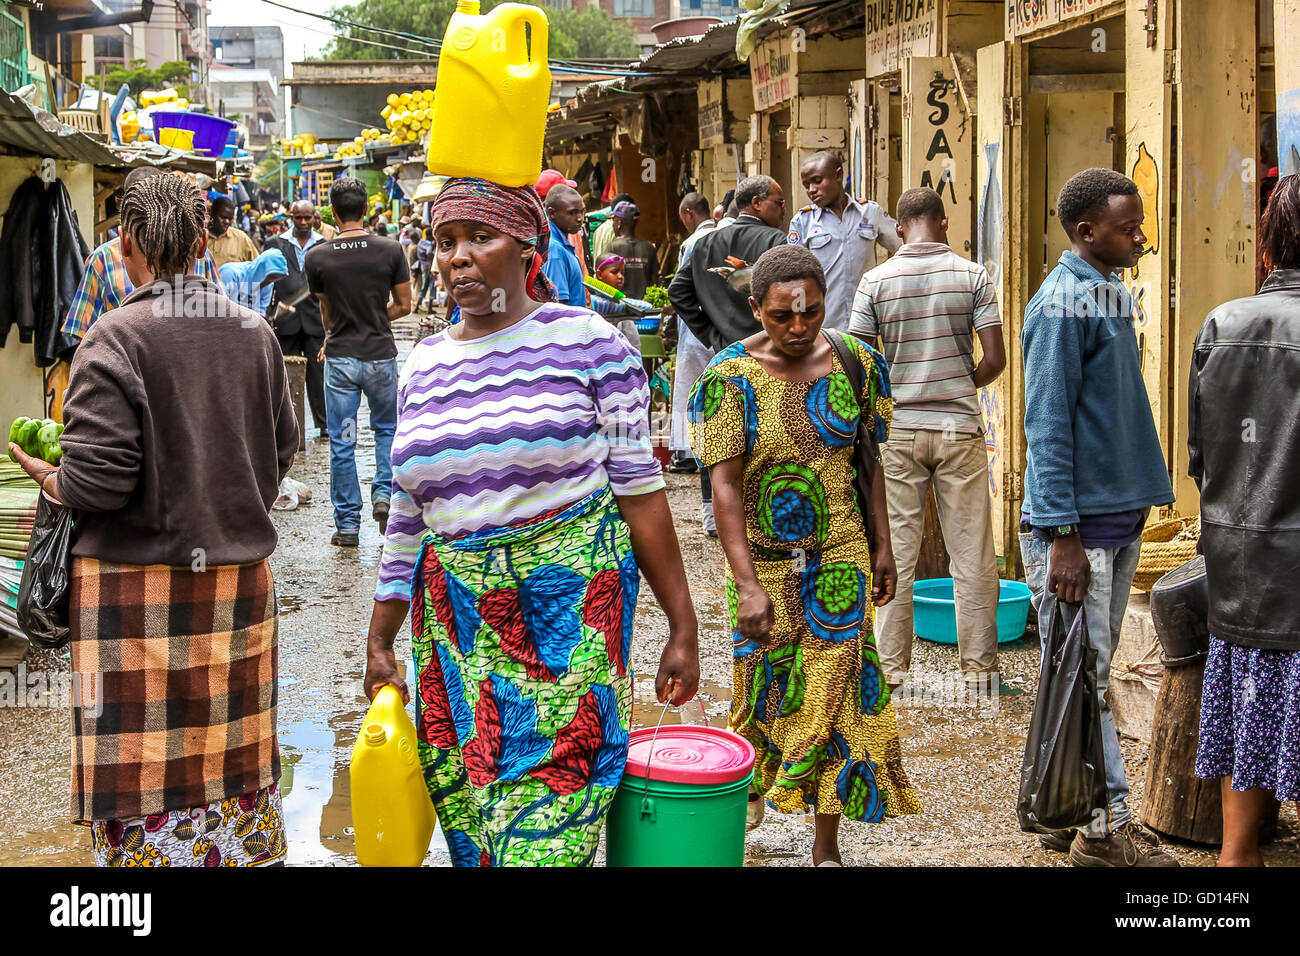 African woman at market Stock Photo